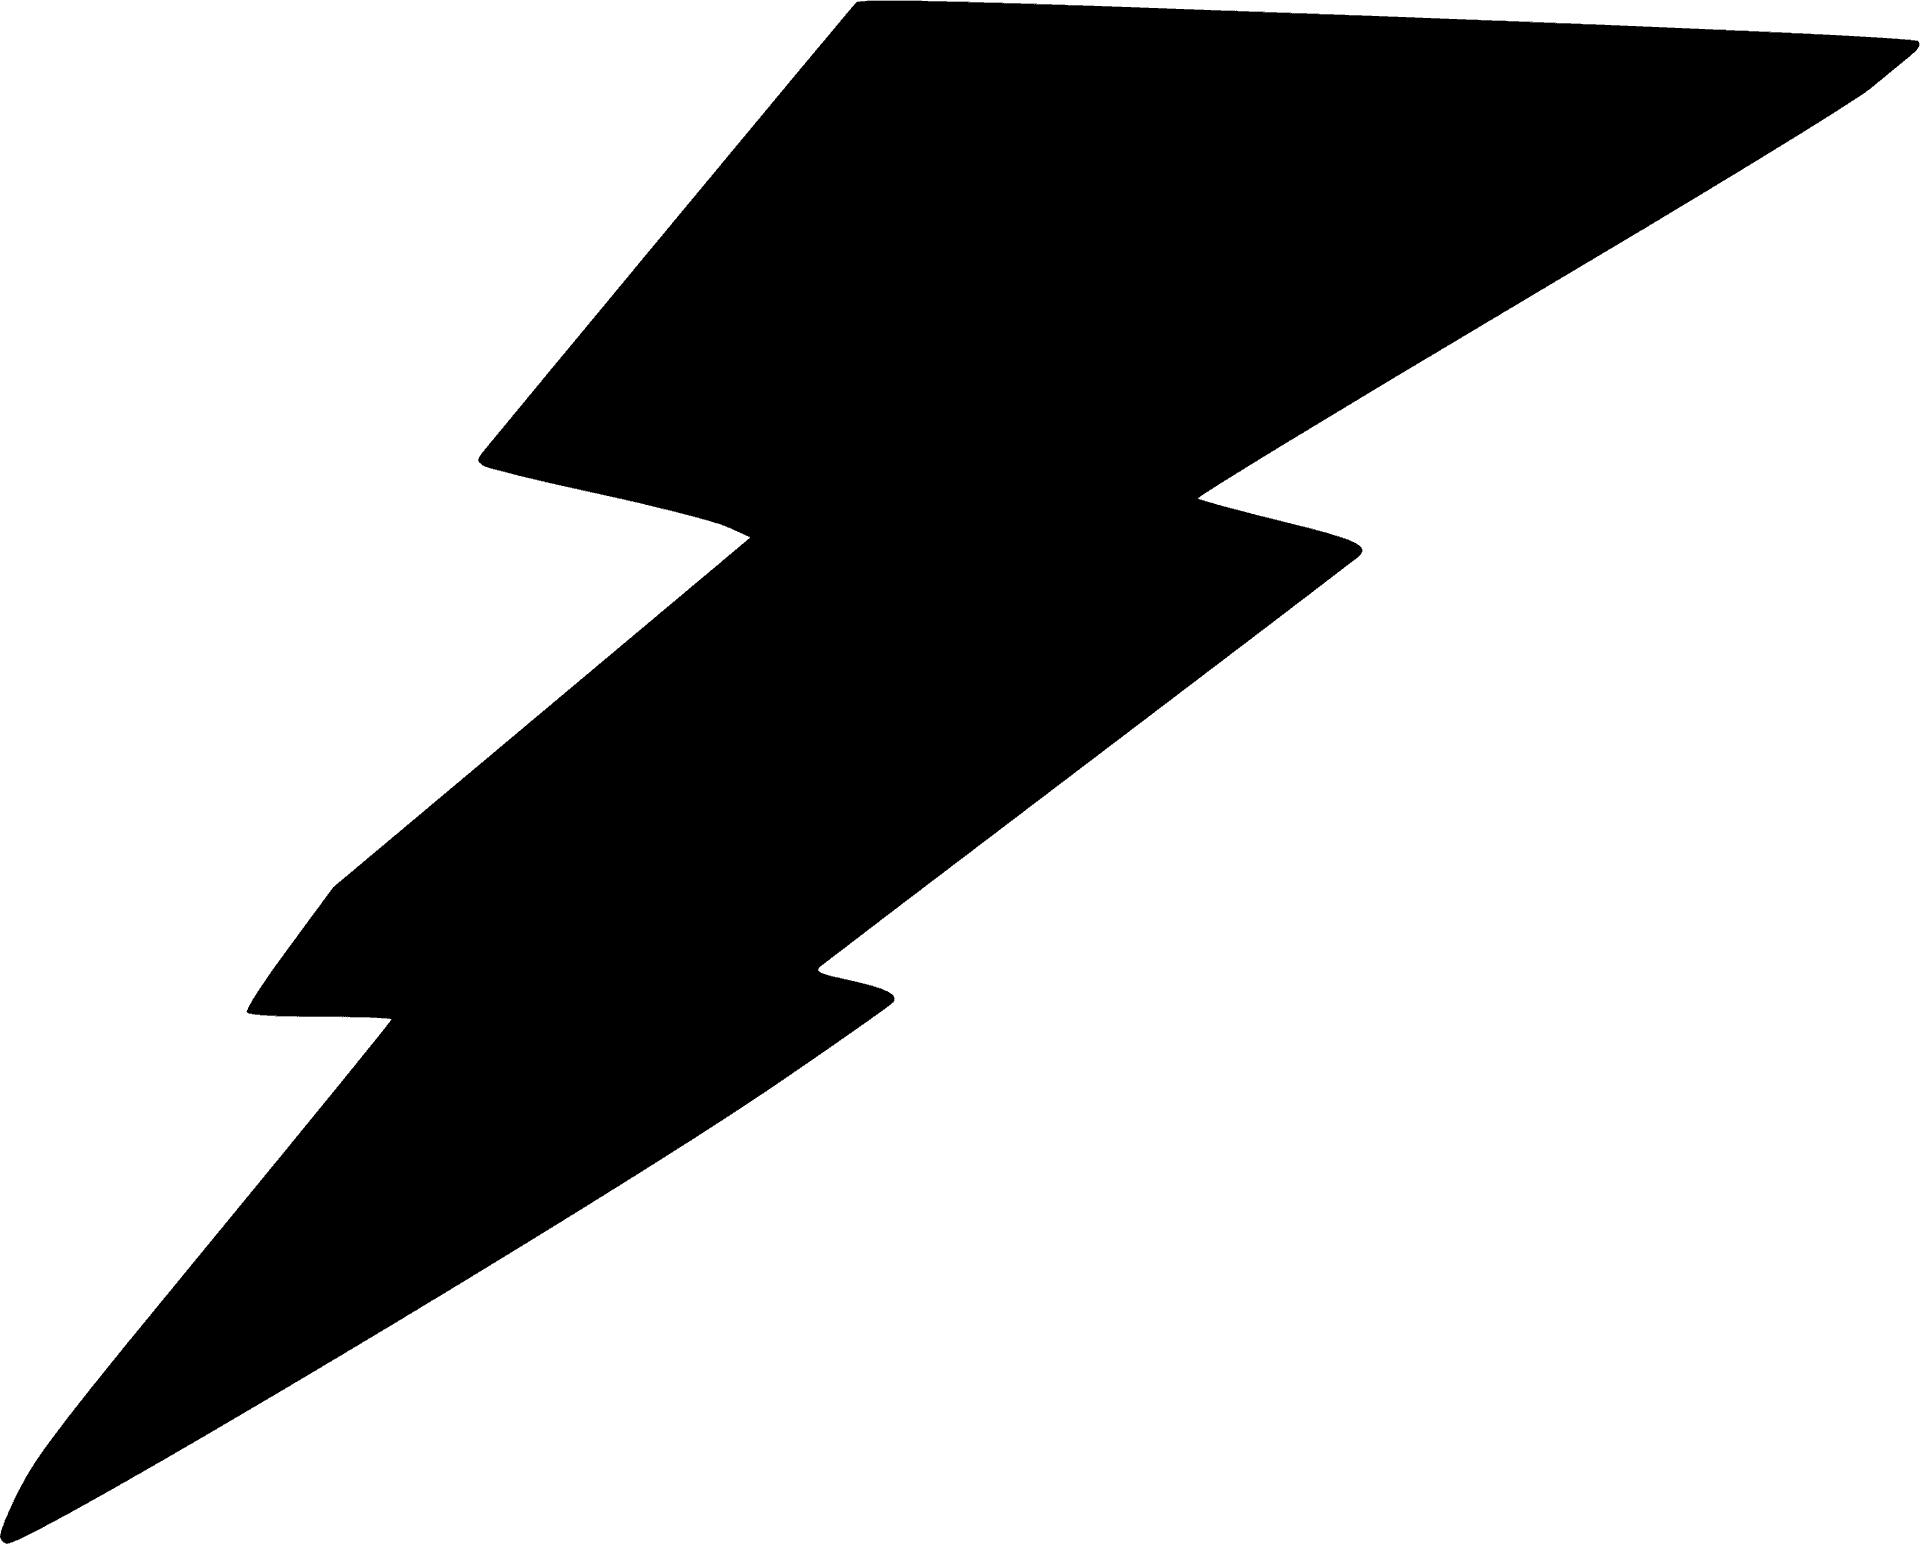 Lightning Bolt Silhouette Graphic PNG